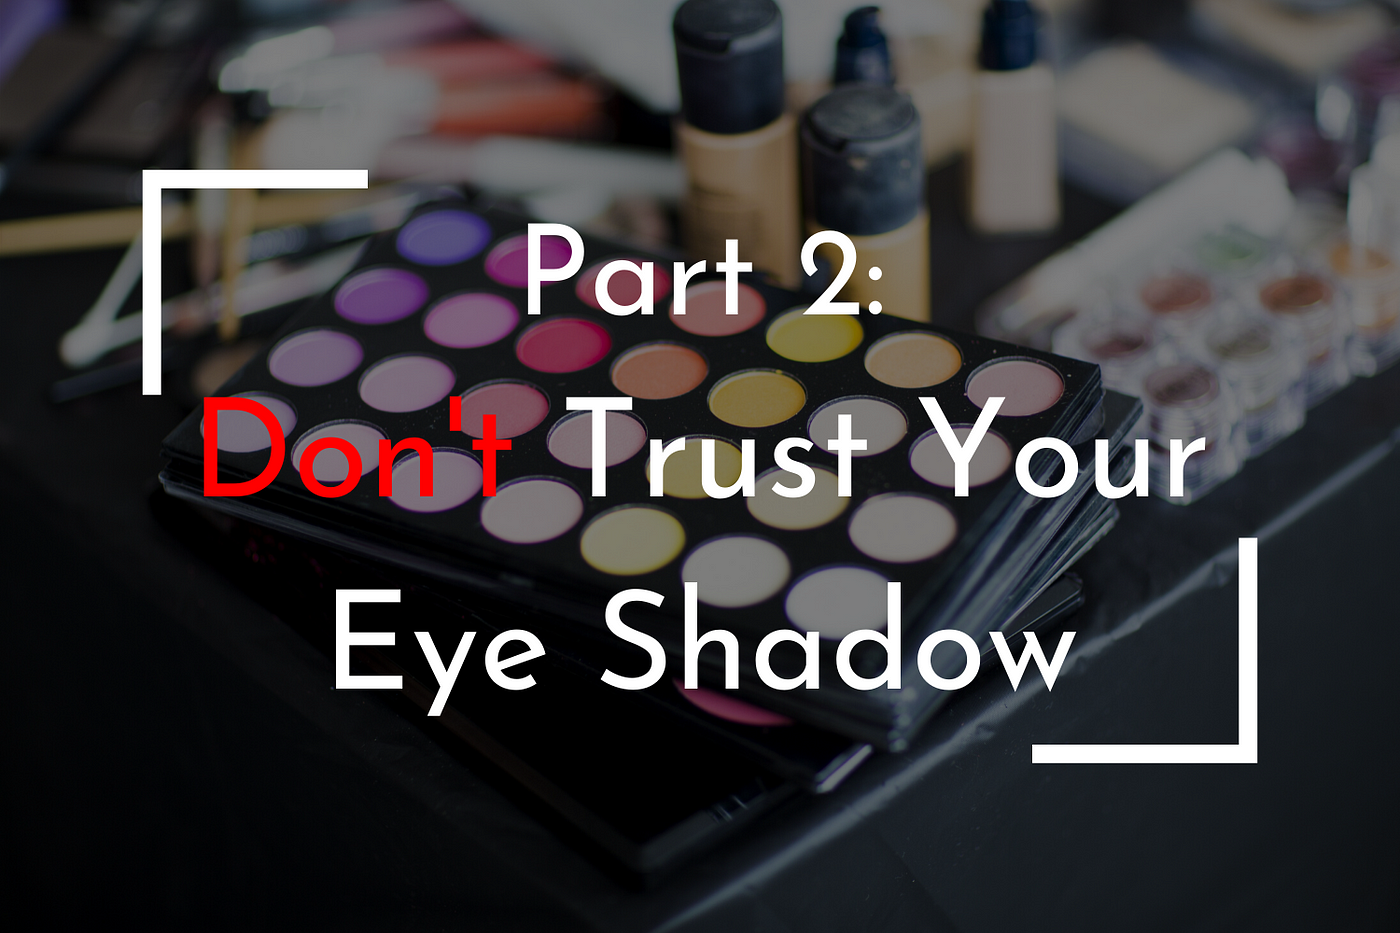 Toxic Eye Shadow Ingredients You Should Avoid at All Costs | by KDB | Medium